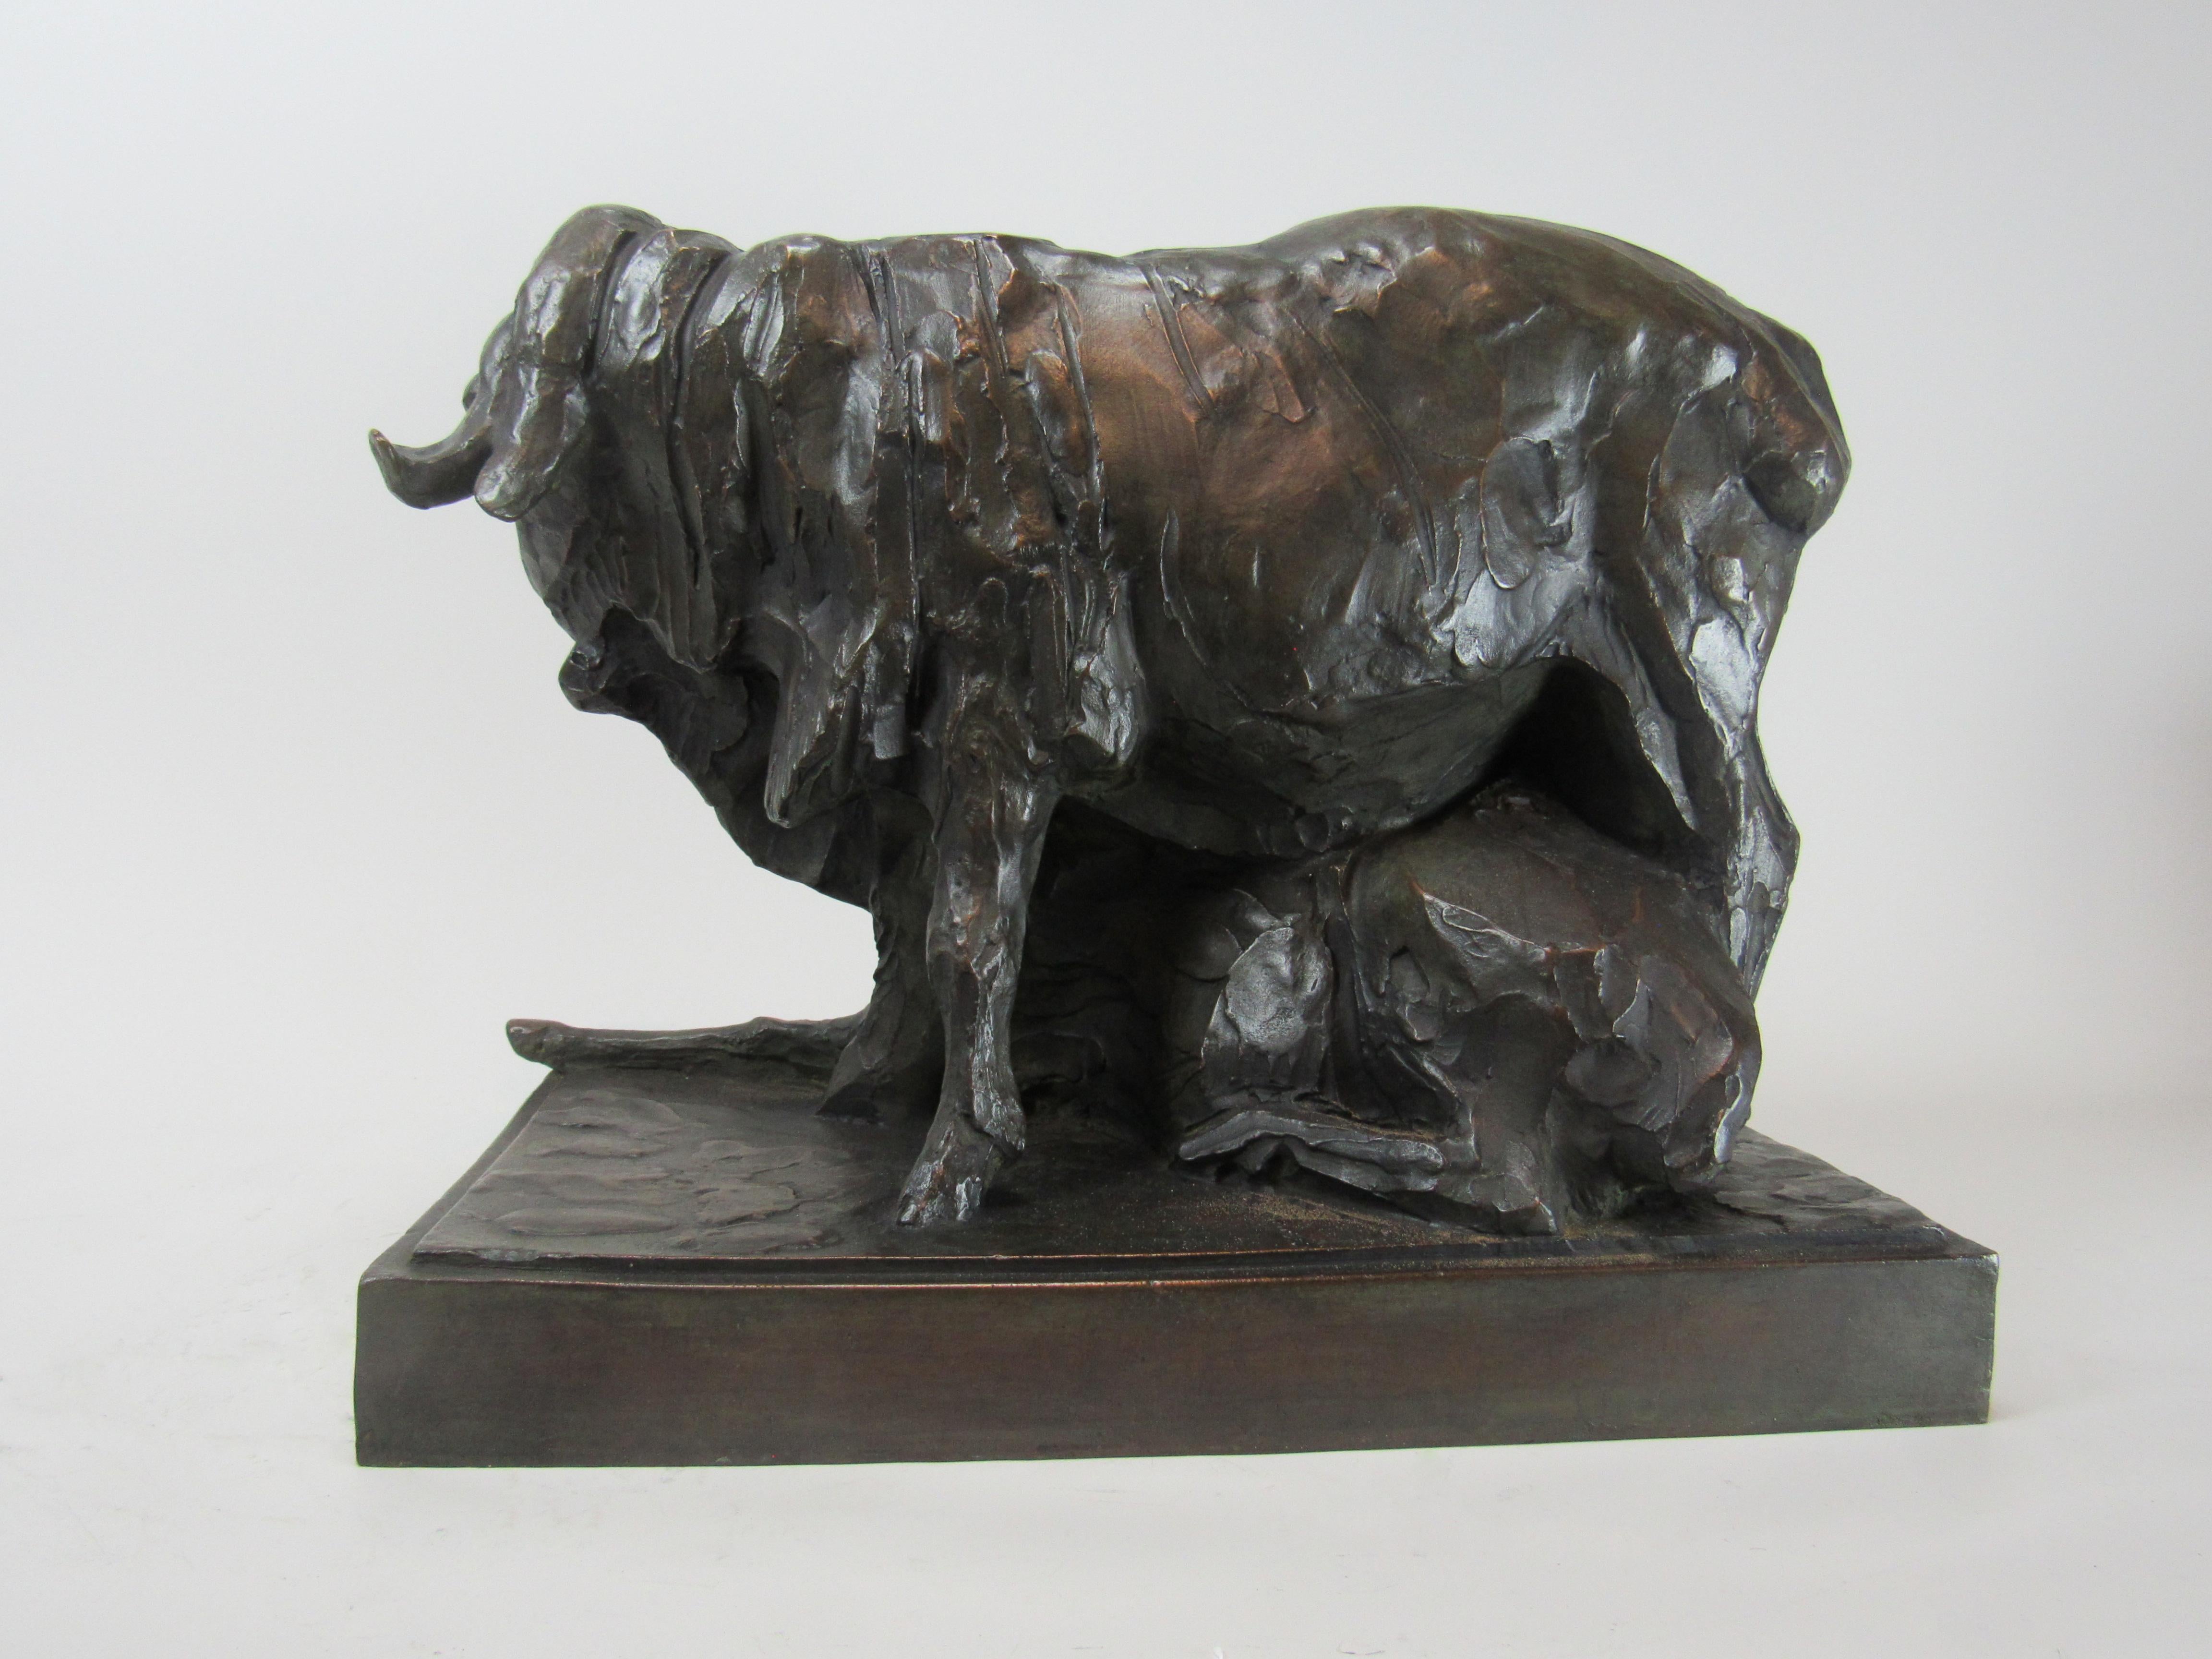 Animal Bronze Ewe and Ram by Alberic Collin (close friend of Rembrandt Bugatti) - Gold Nude Sculpture by Albéric Collin